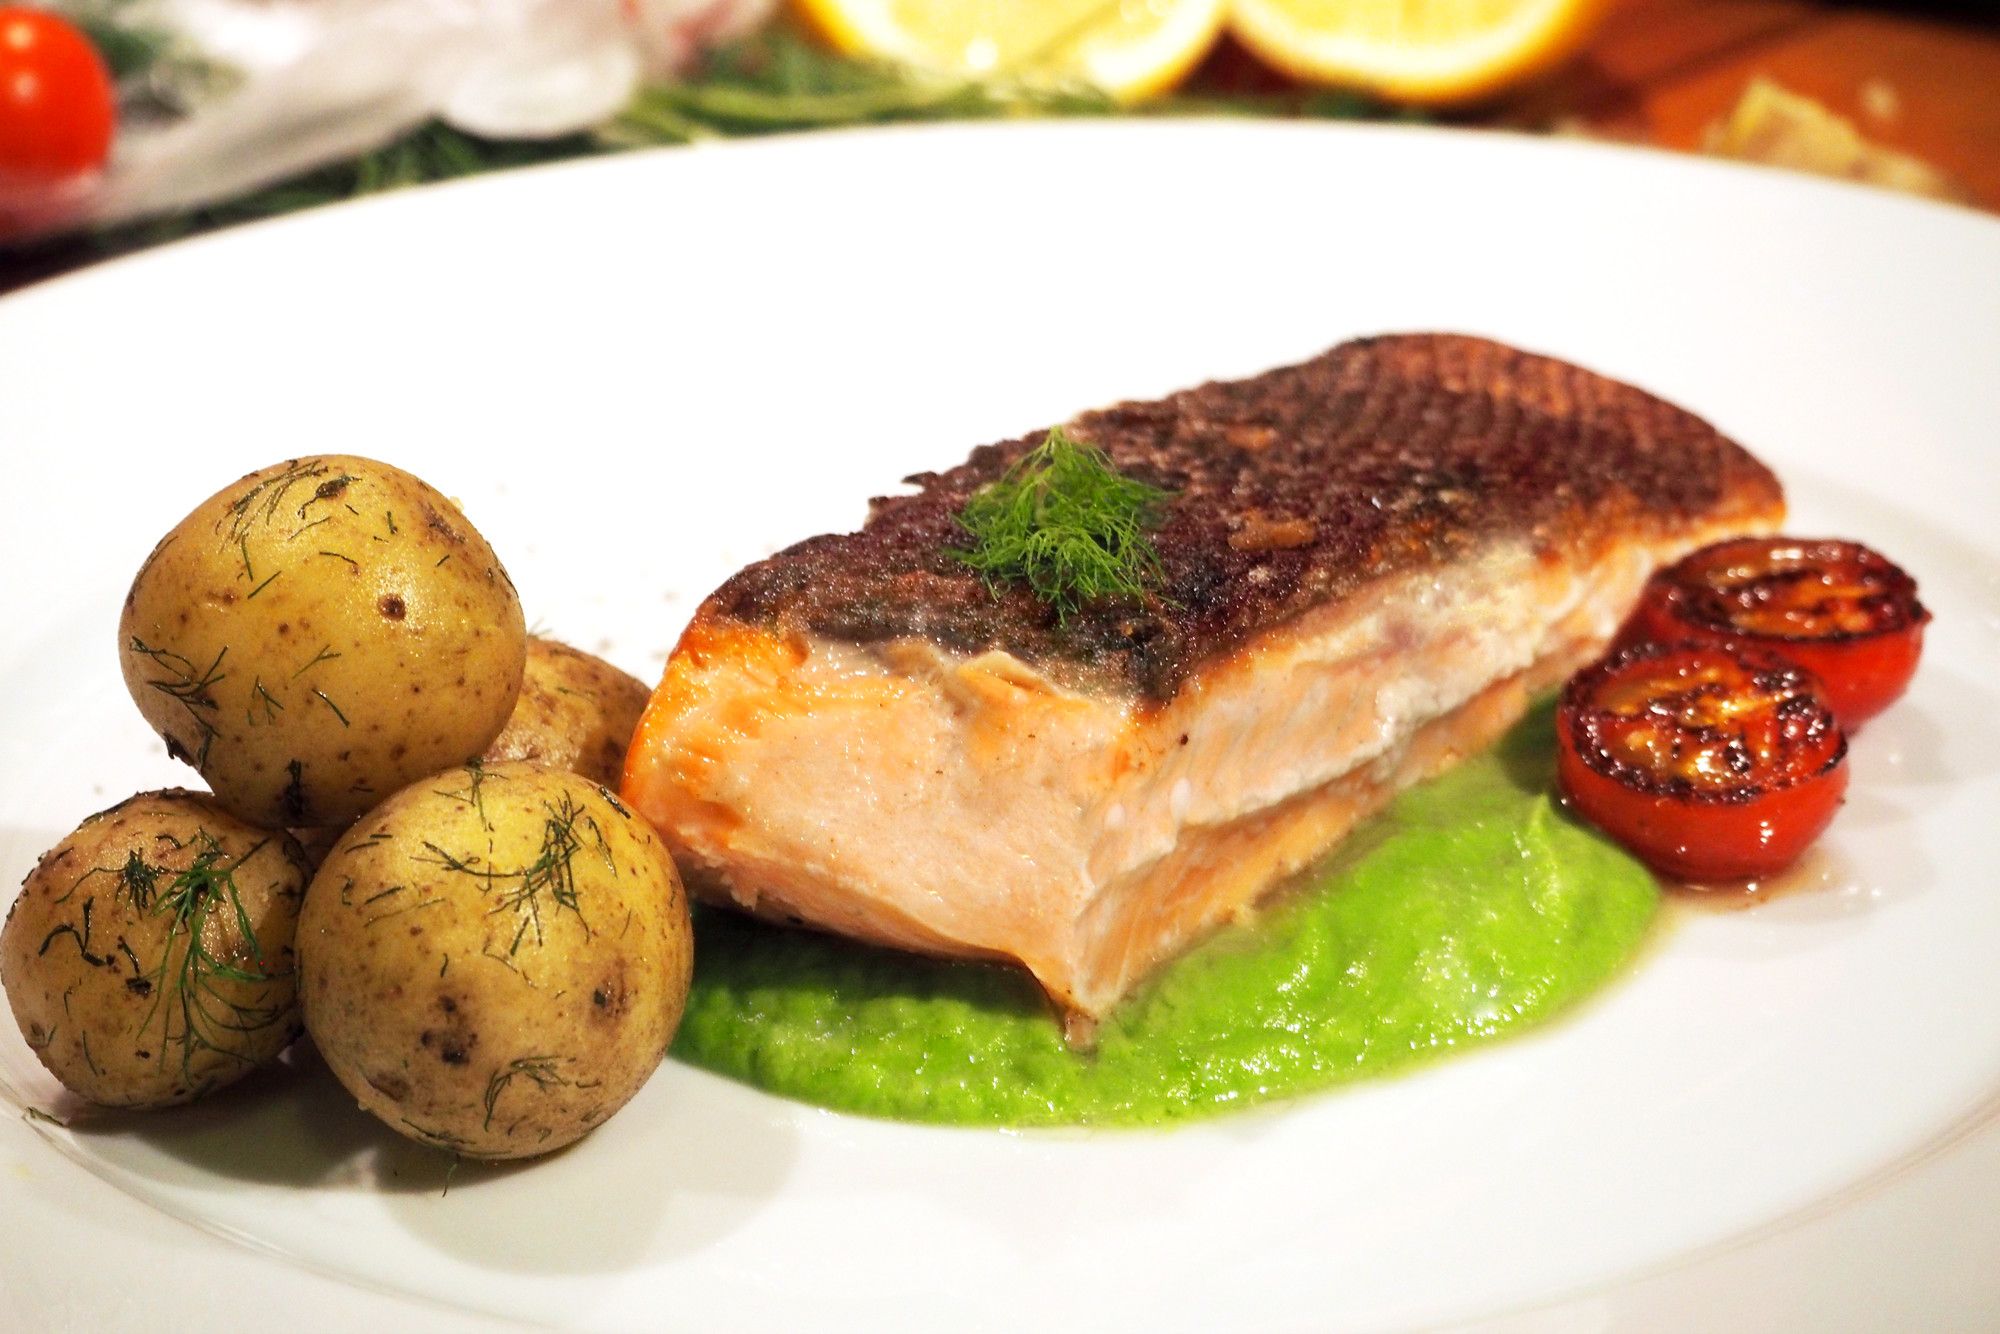 Glorious salmon with pea purée